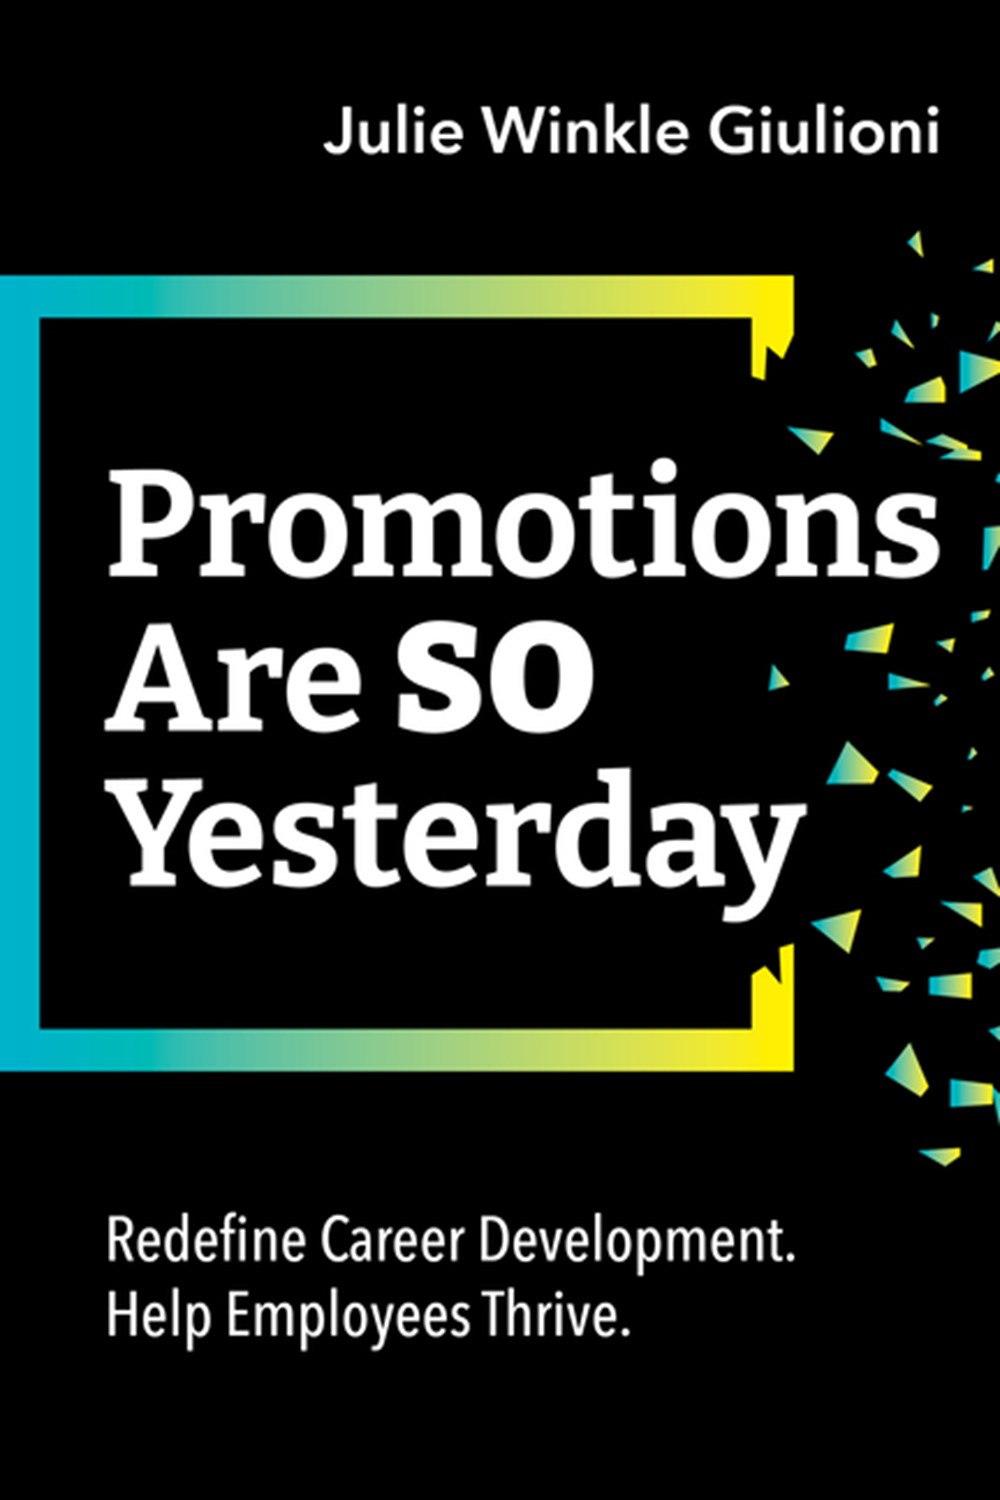 Promotions Are So Yesterday Redefine Career Development. Help Employees Thrive.